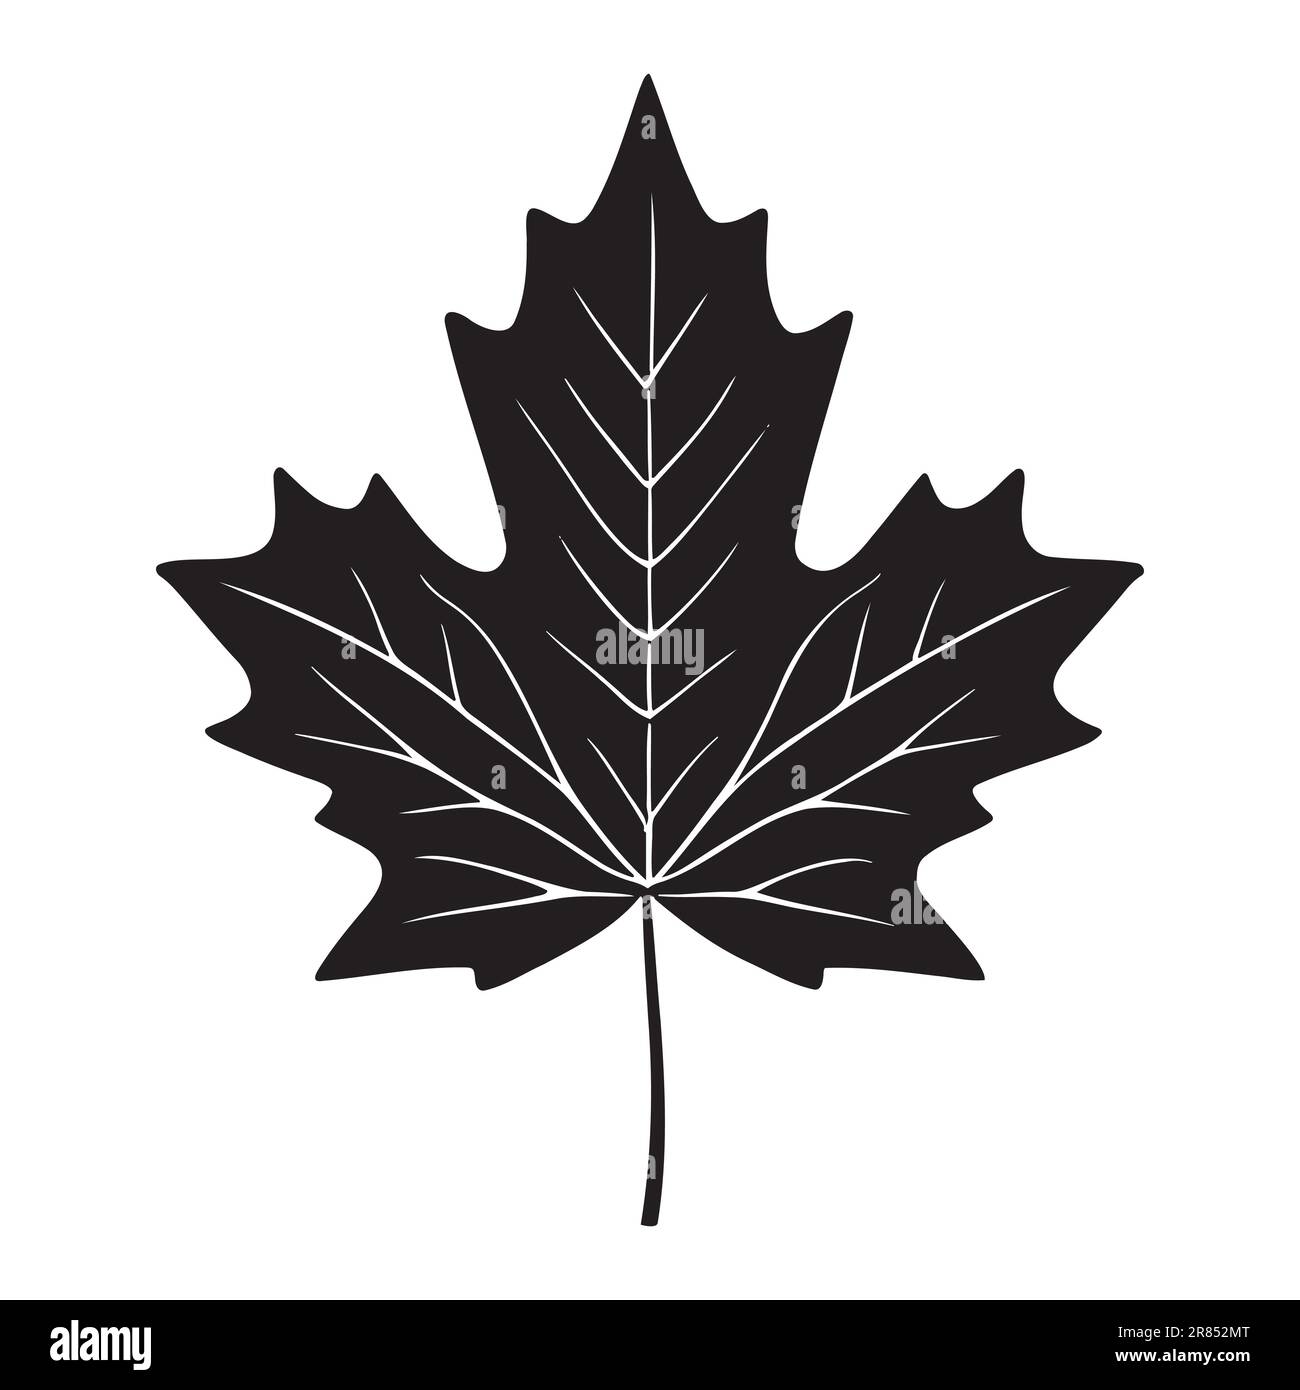 Maple leaf silhouette logo isolated on white background, vector icon Stock Vector